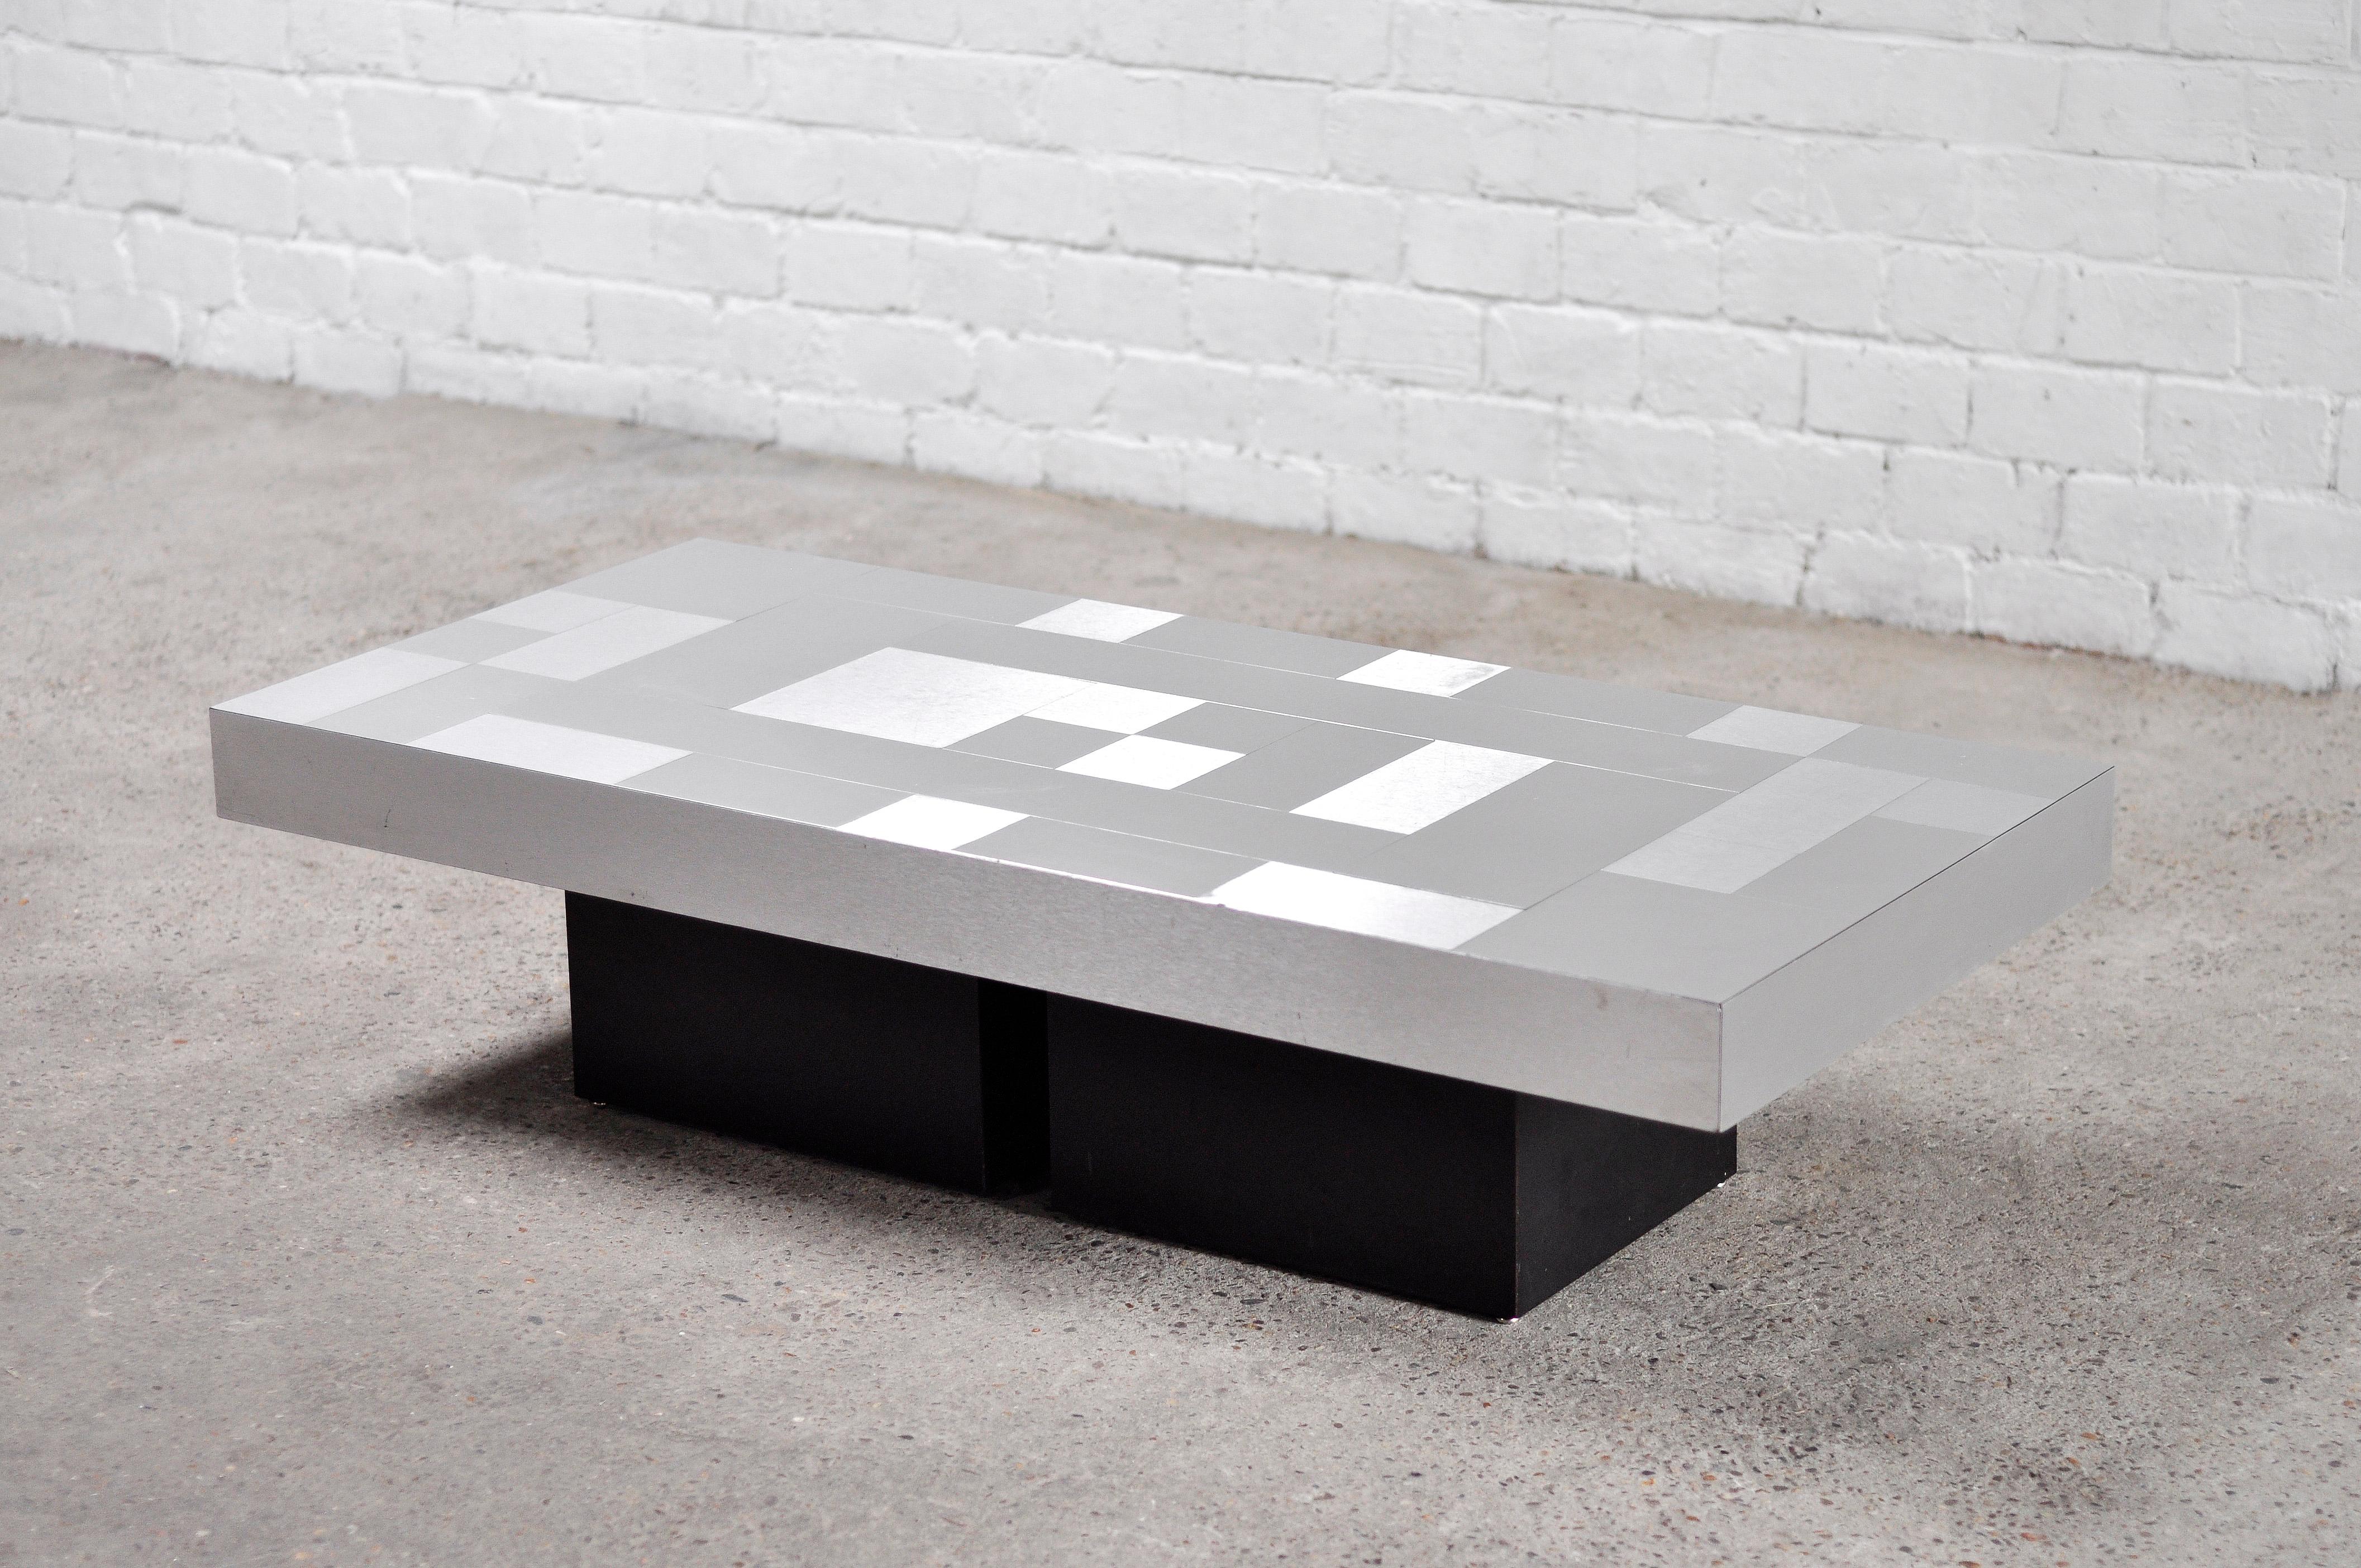 Brushed aluminum coffee table featuring a graphical mosaic or checkerboard style tablet. The central base is made of qualitative black laminated wood.

In fair condition for the age. There are signs of wear to the top in the form of